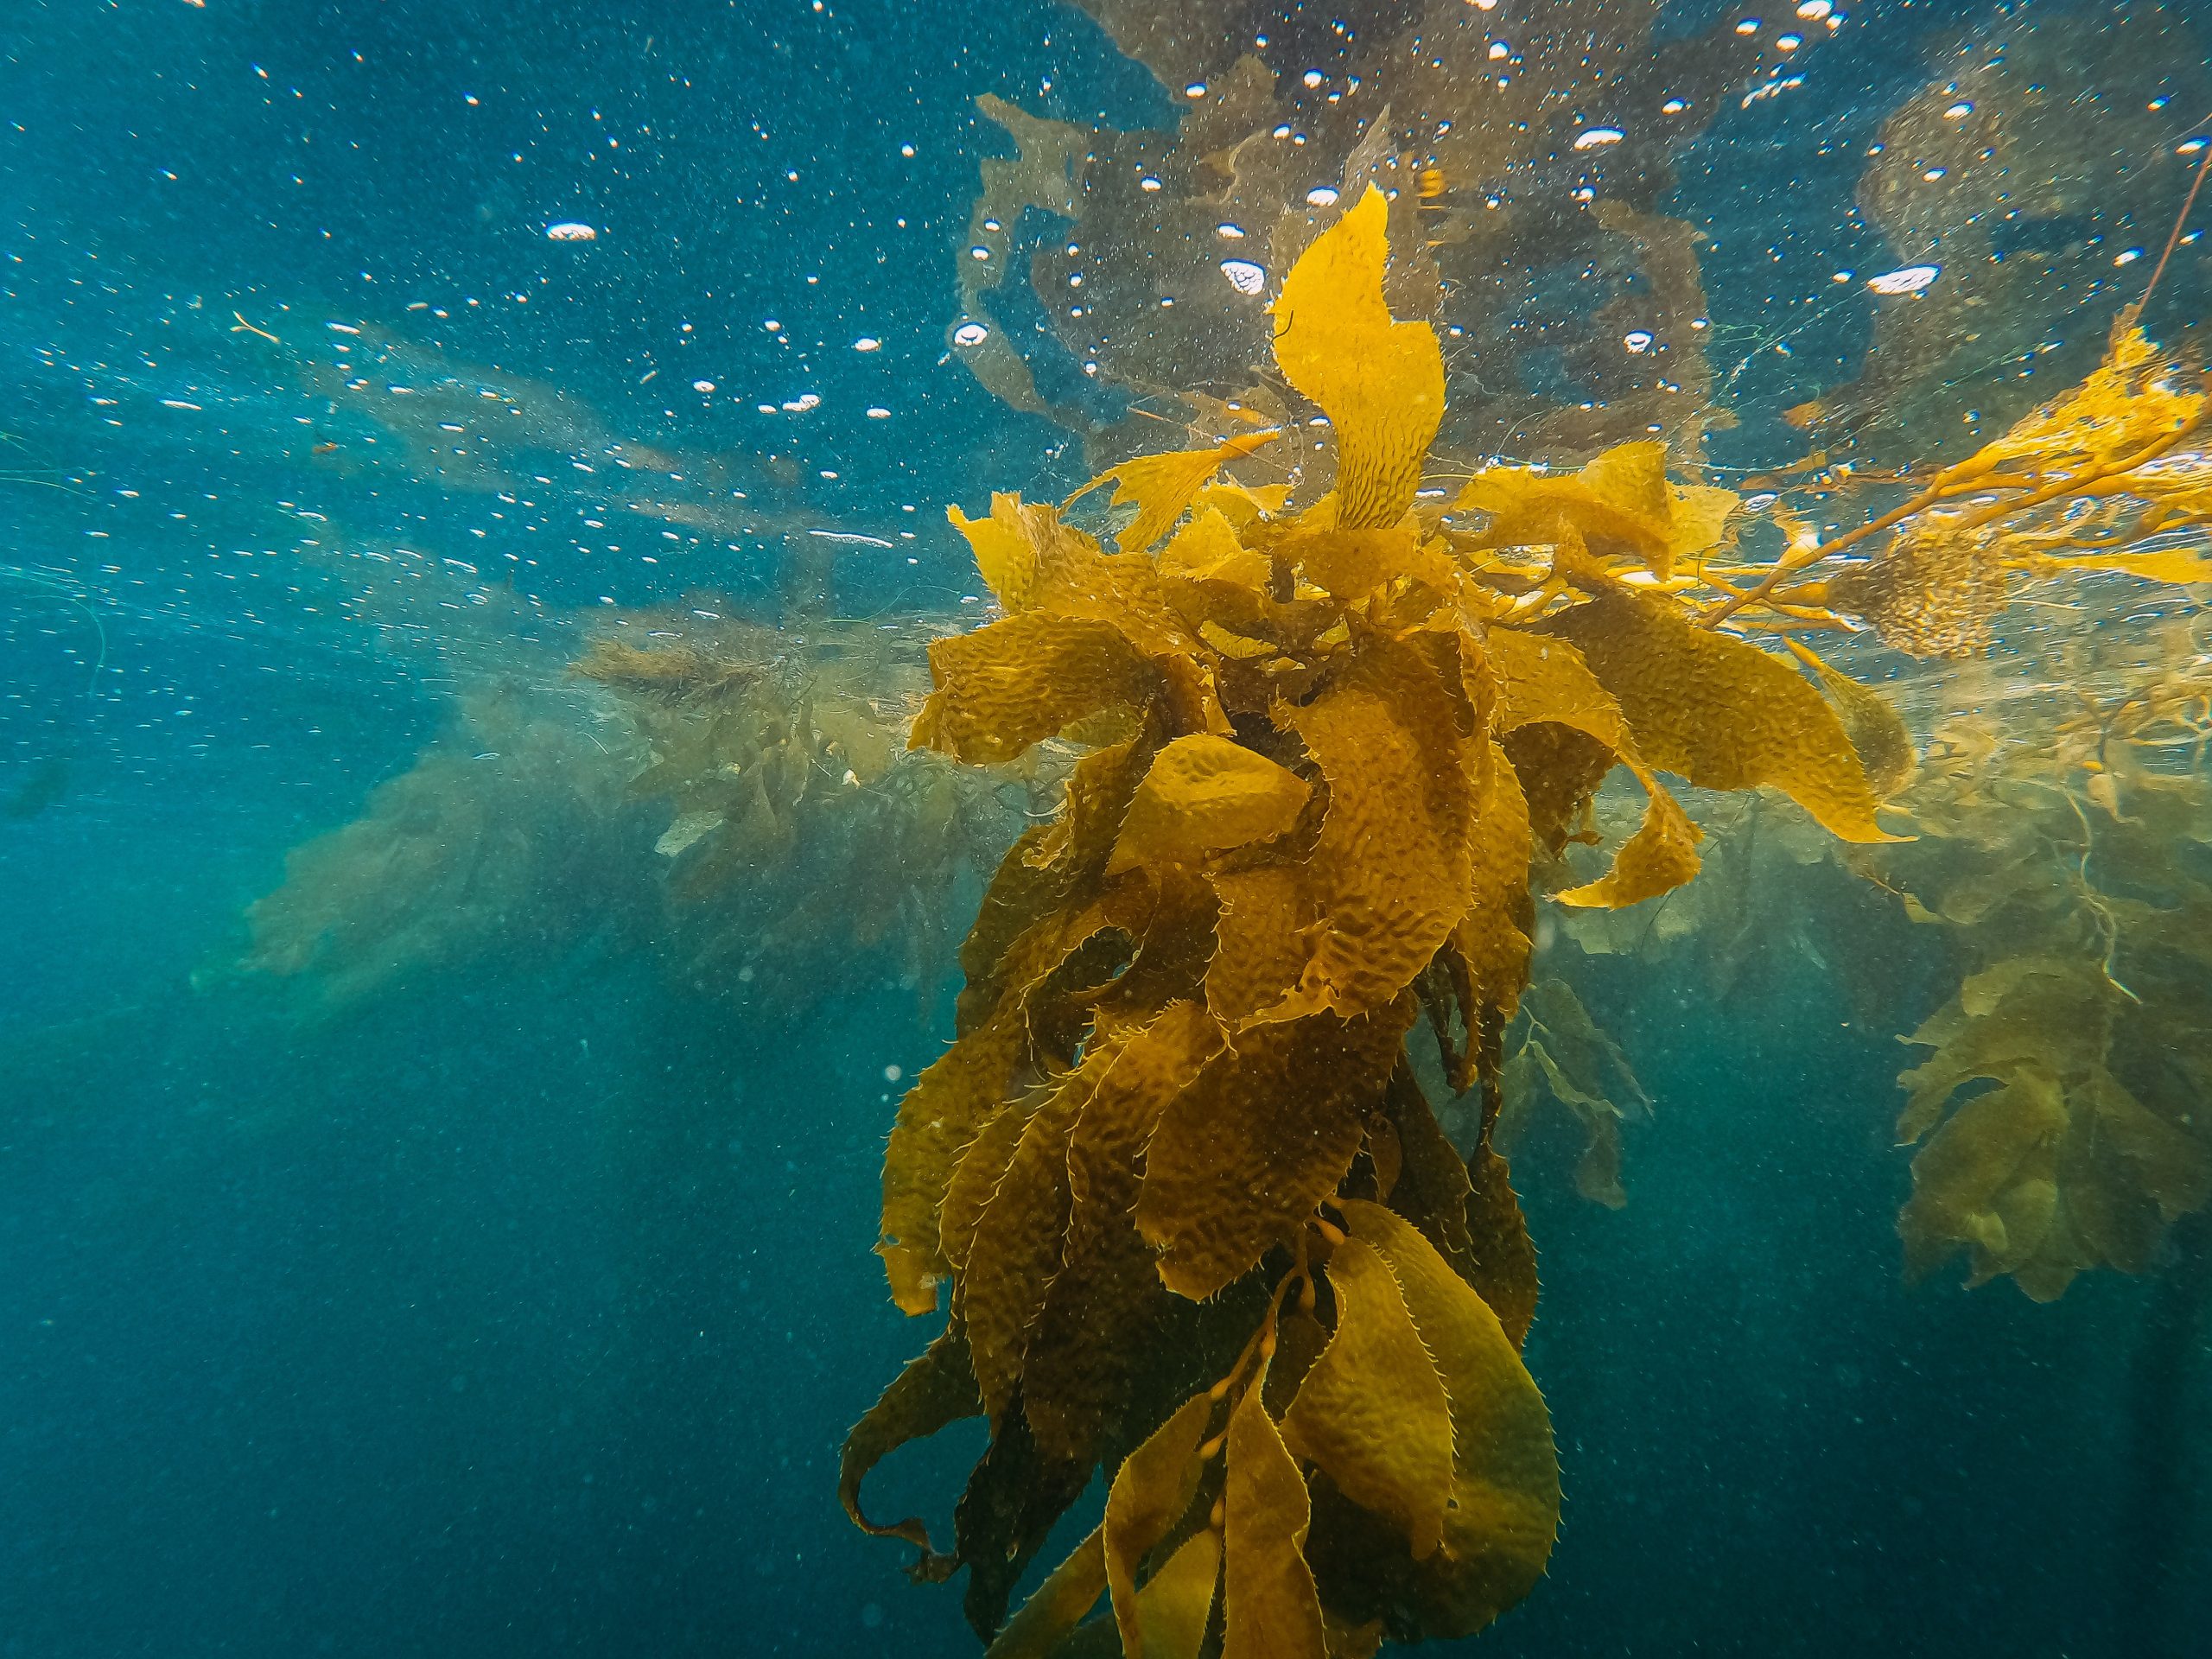 An underwater photograph of a kelp forest